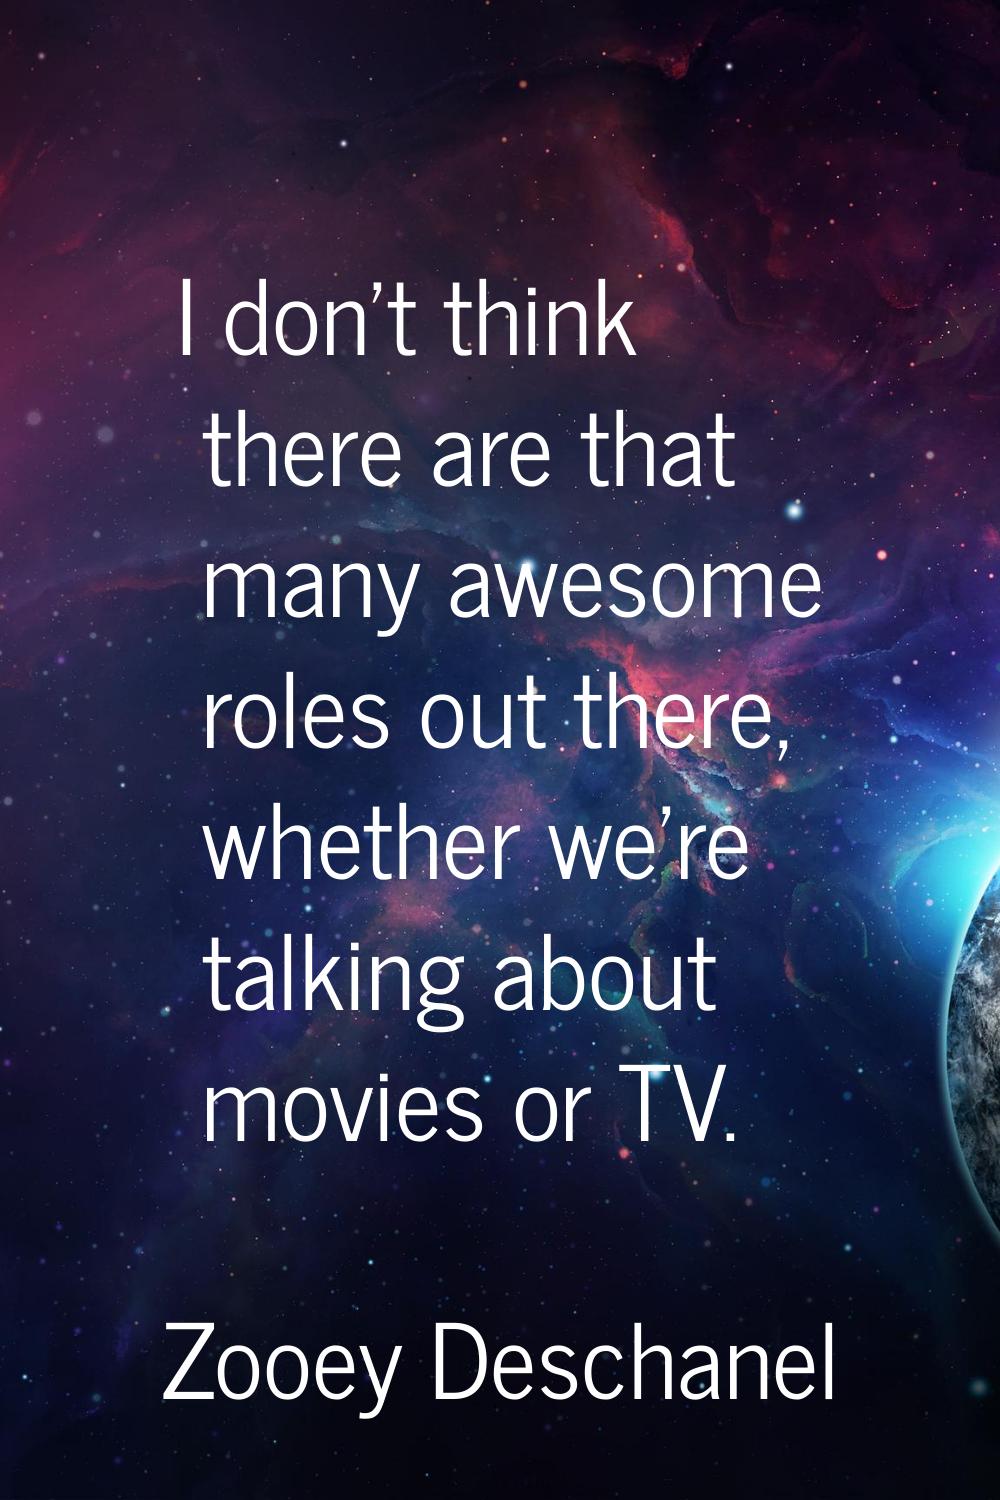 I don't think there are that many awesome roles out there, whether we're talking about movies or TV